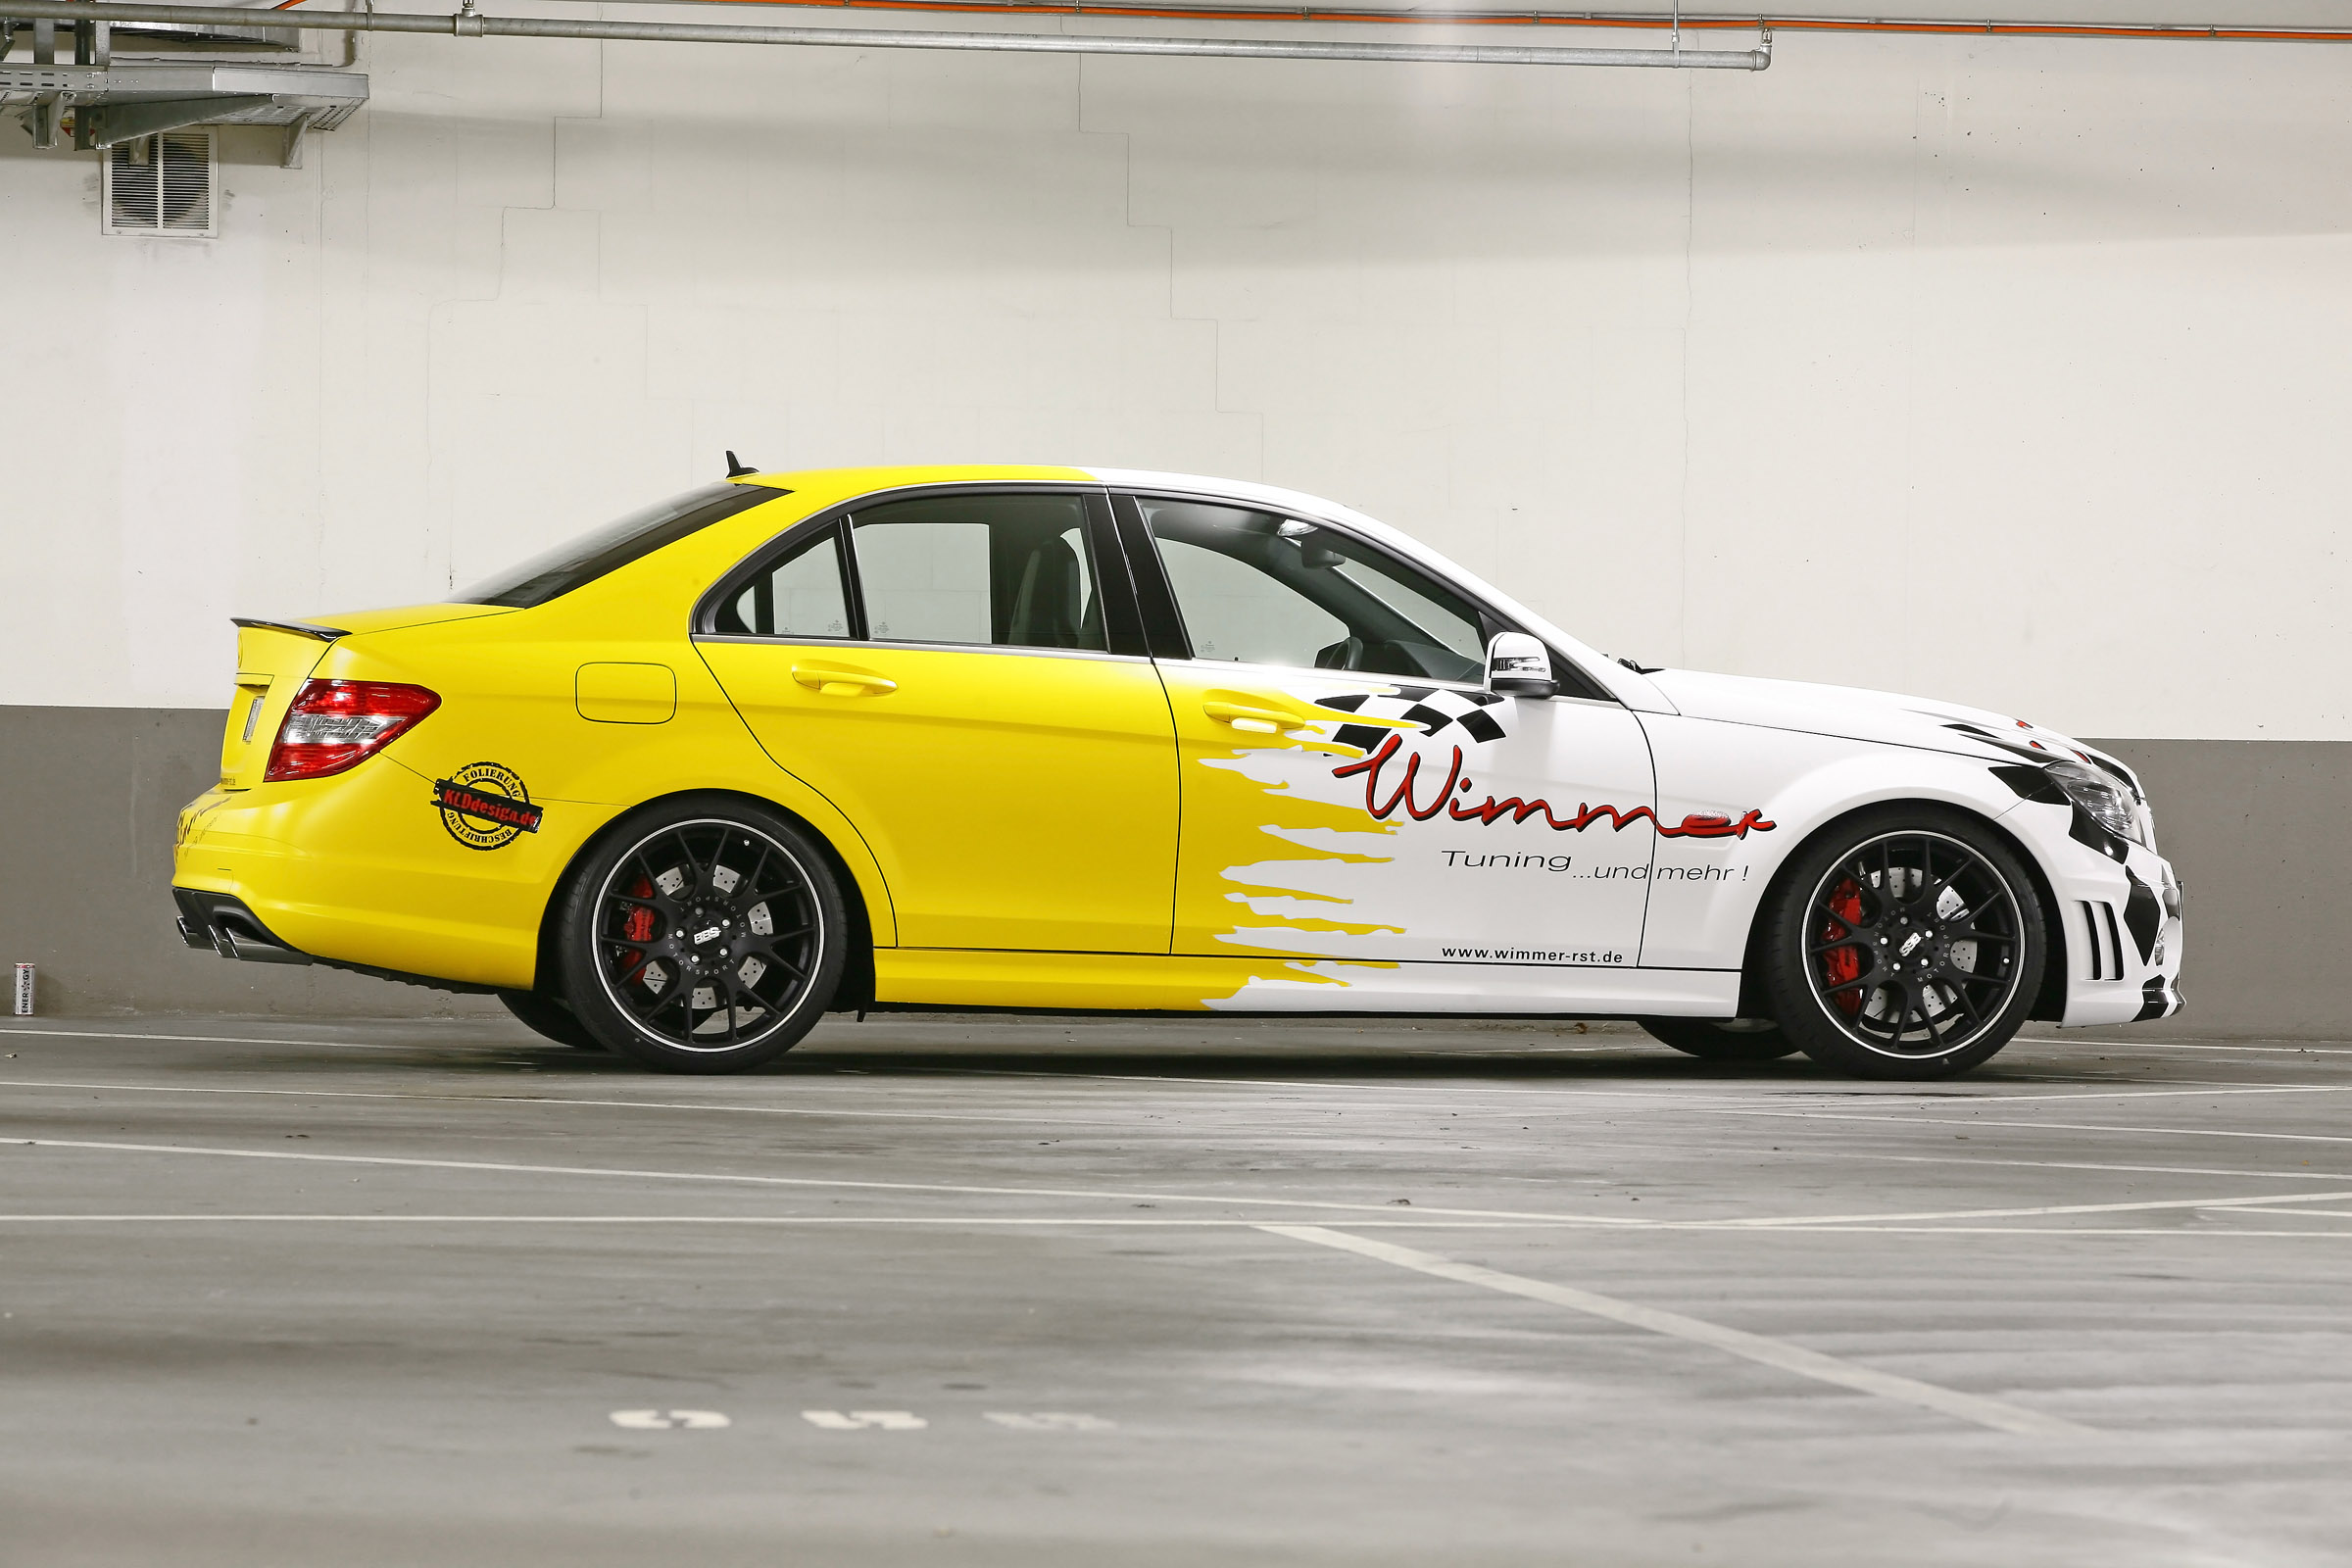 Wimmer RS Mercedes C63 AMG Performance